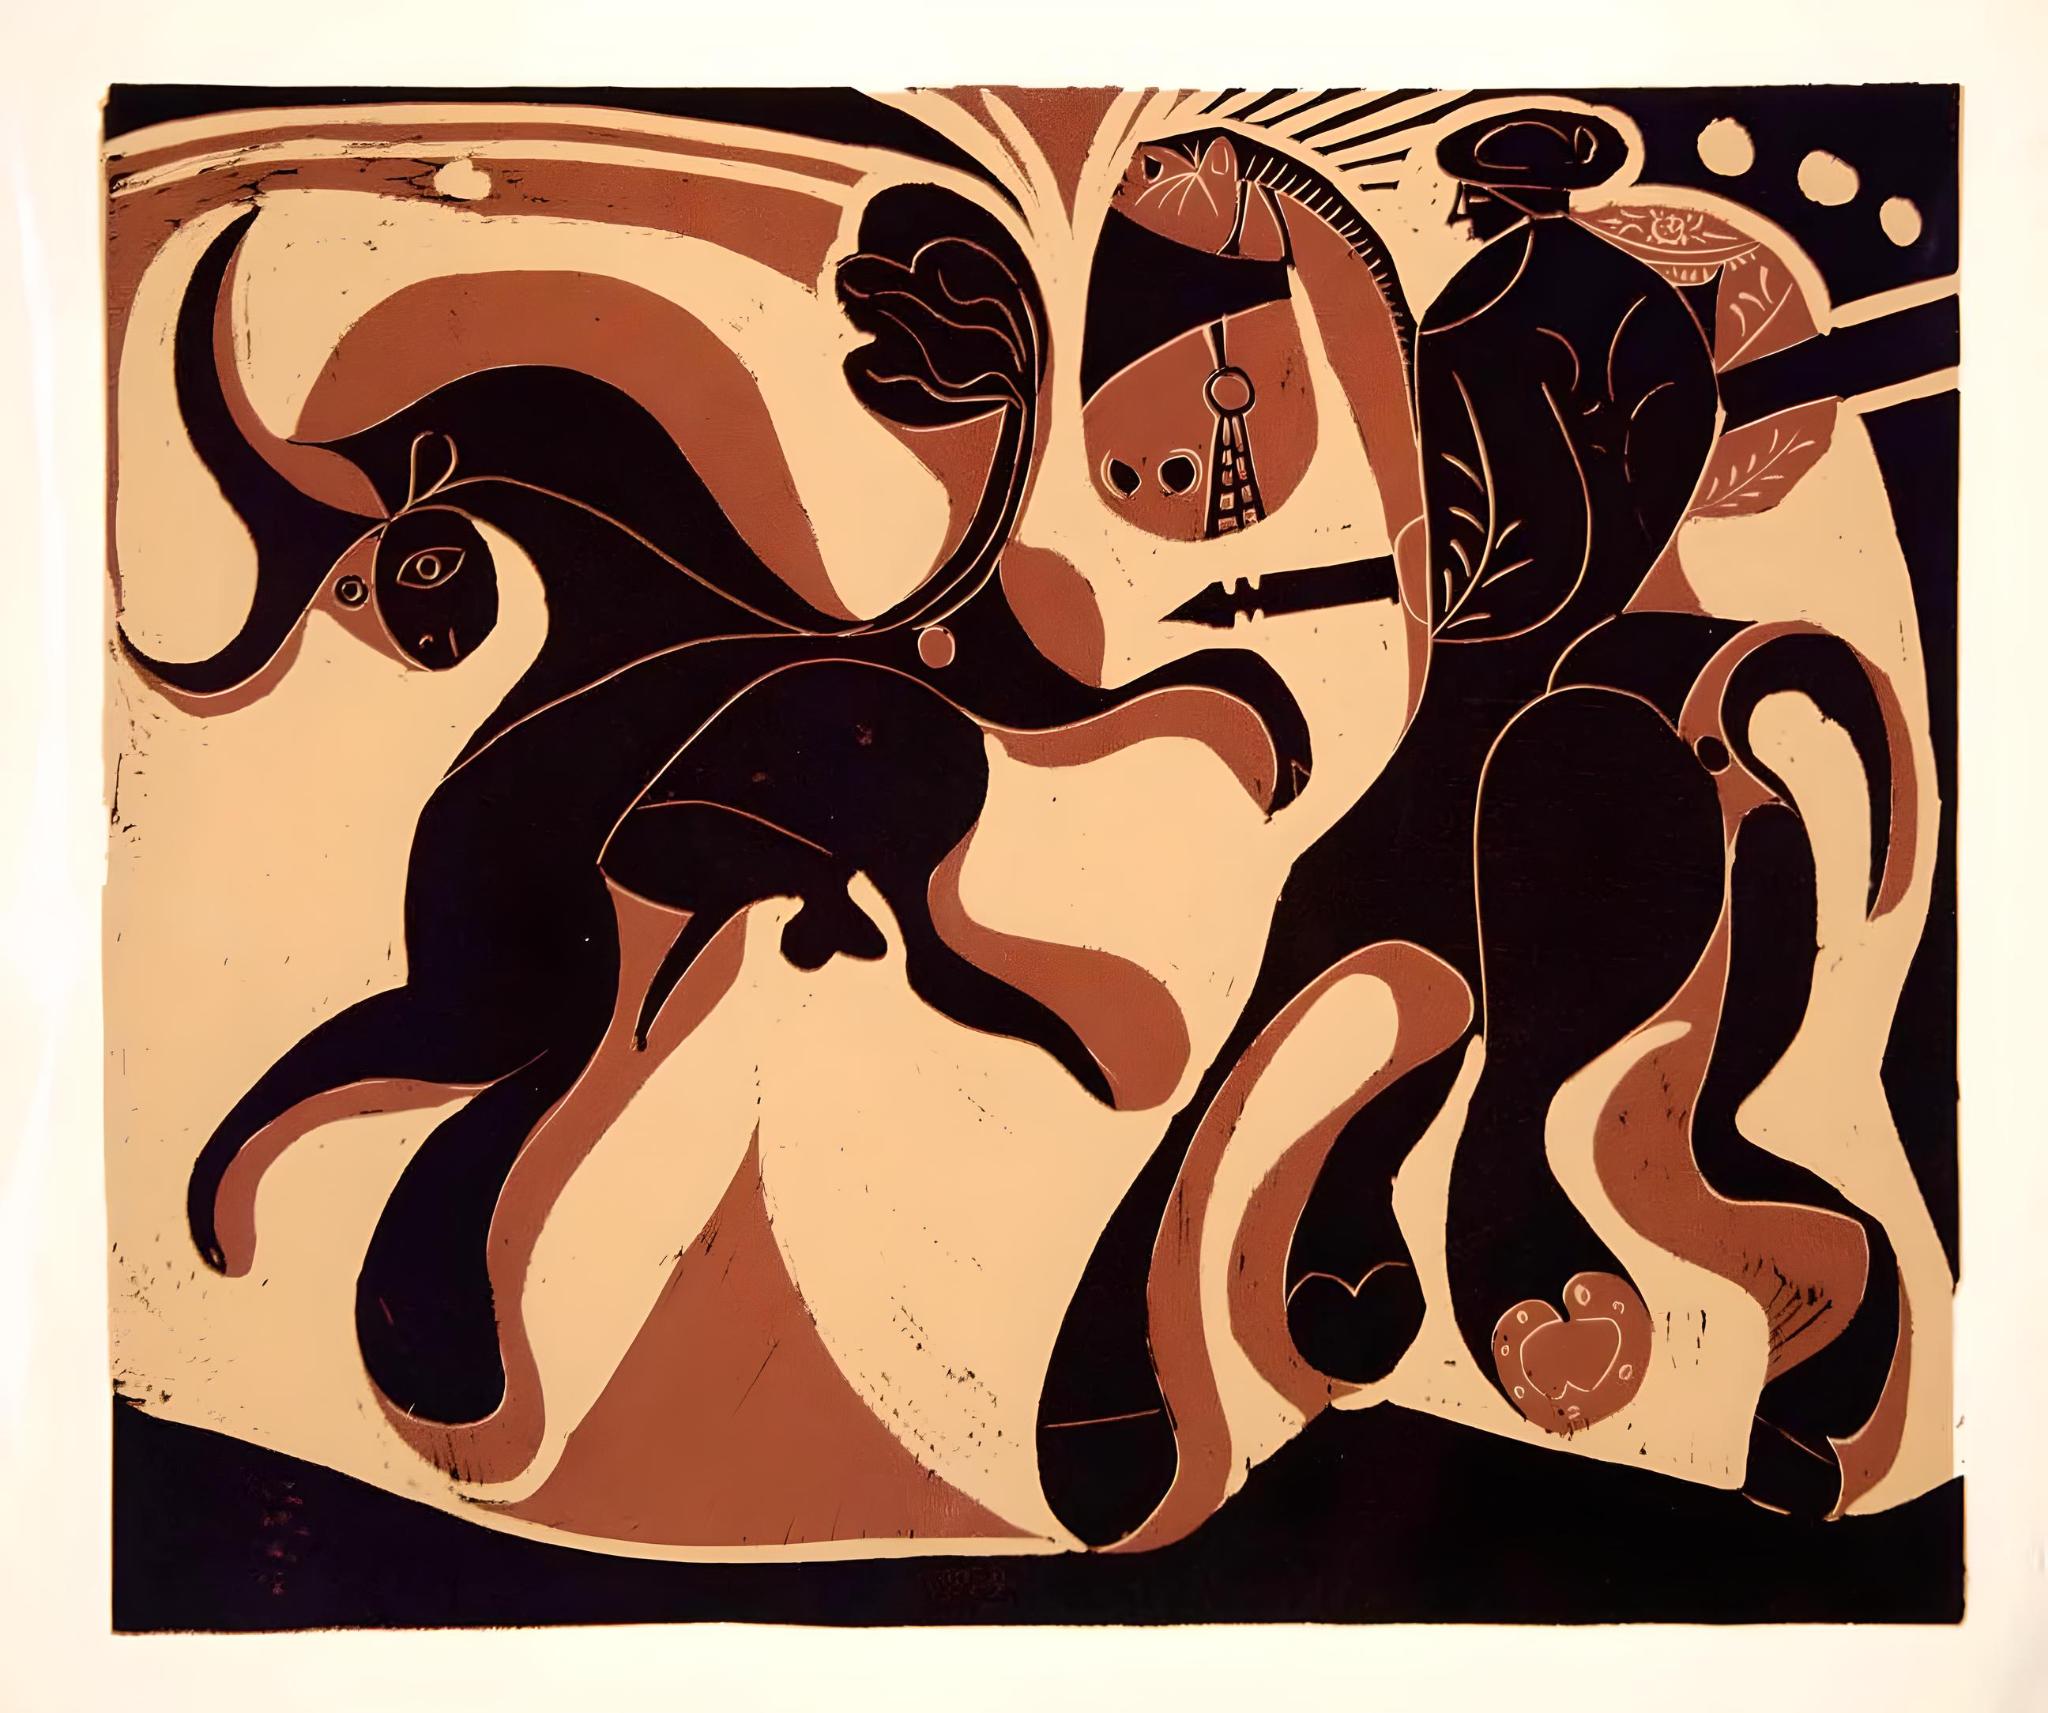 Picasso, Picador and Fleeing Bull, Éditions Cercle d’Art (after) - Cubist Print by Pablo Picasso